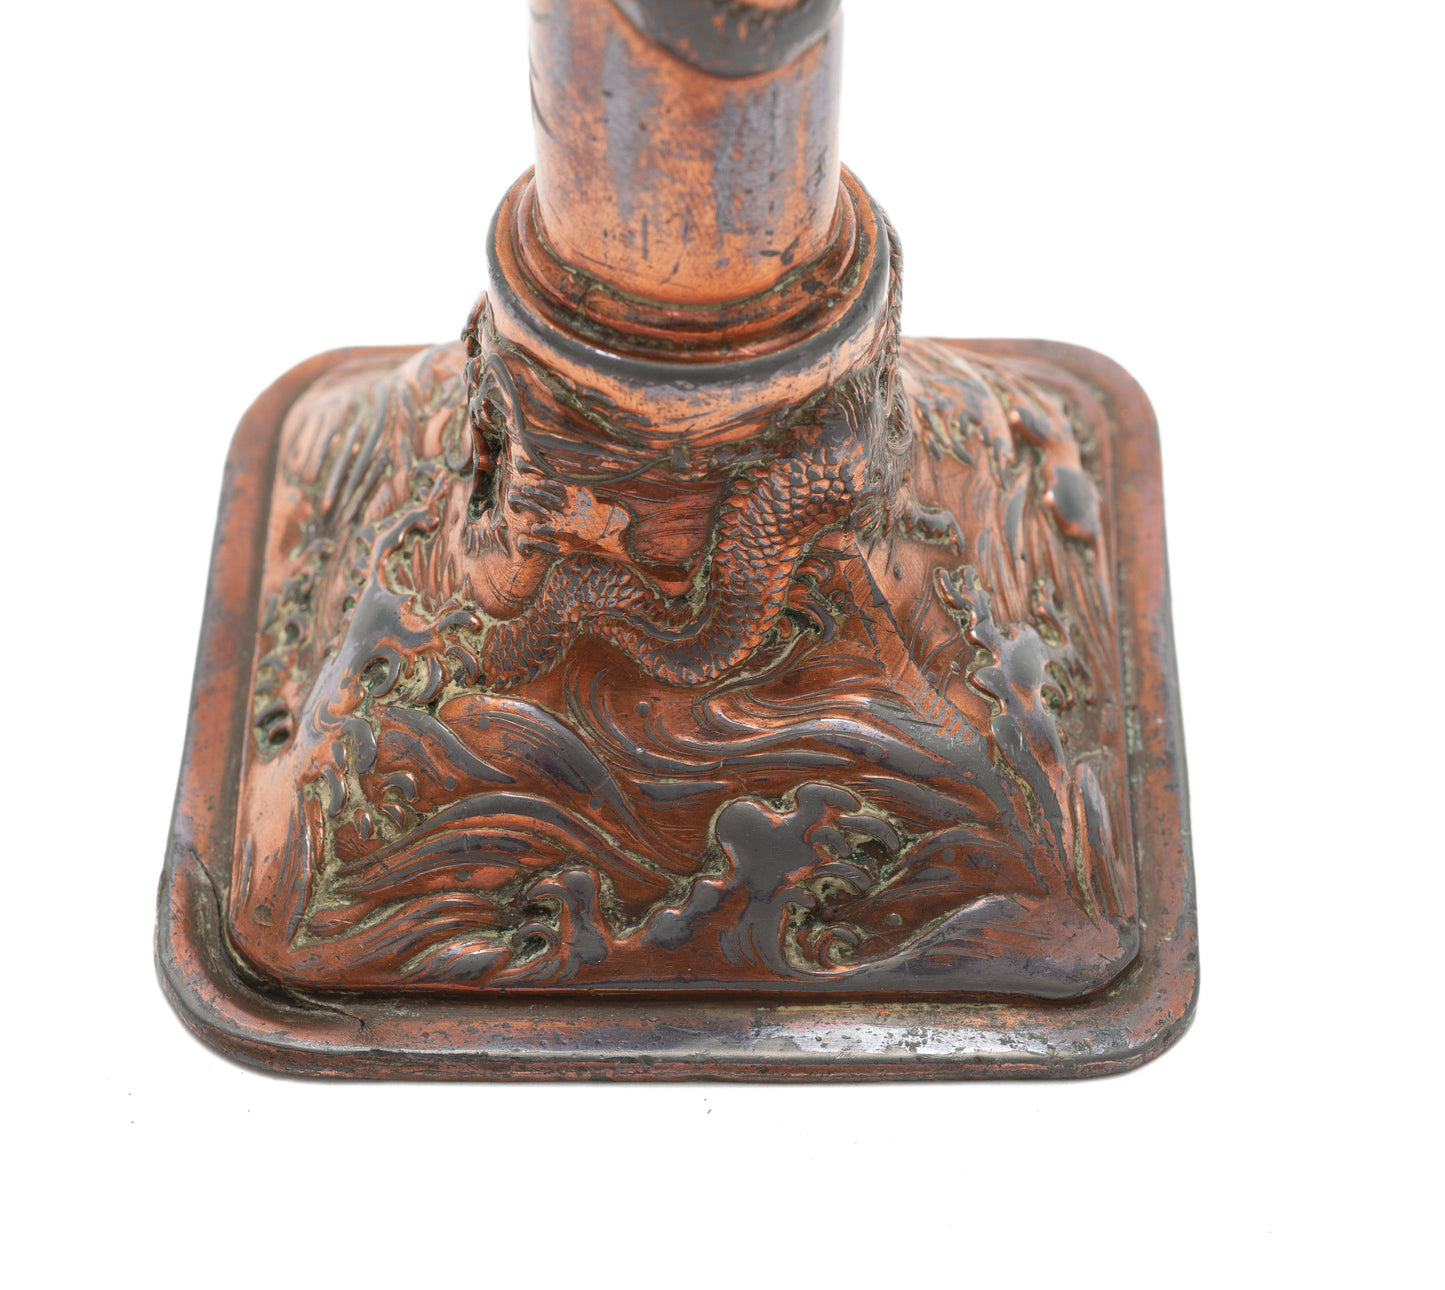 Antique Japanese Antimony & Copper Plated Candlestick with Dragons (Code 2210)